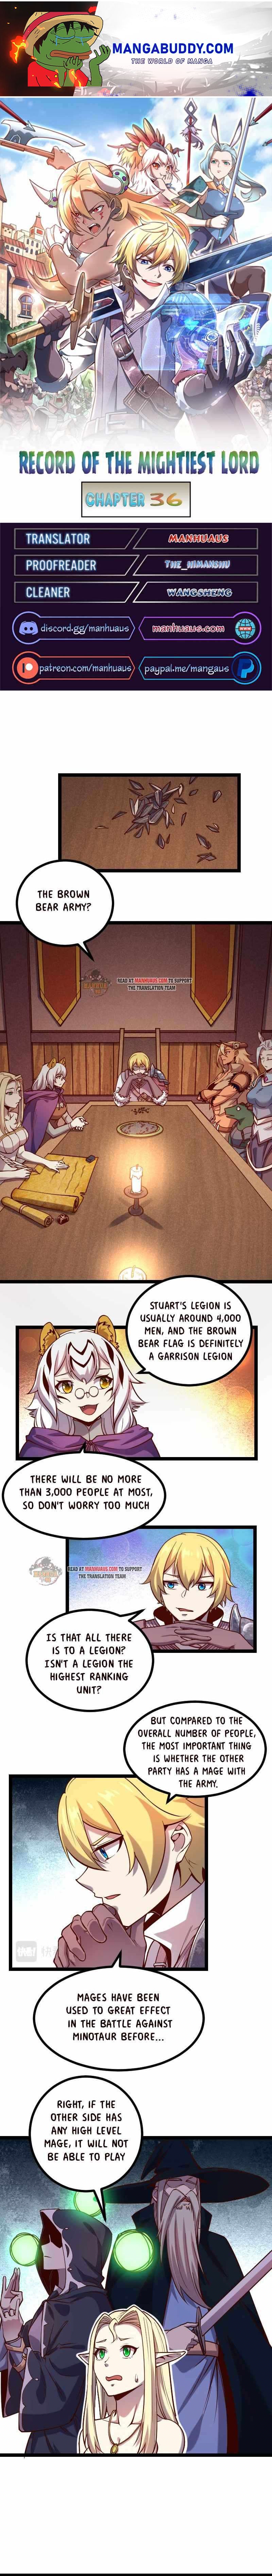 I Am The Strongest Lord In Another World - Page 1